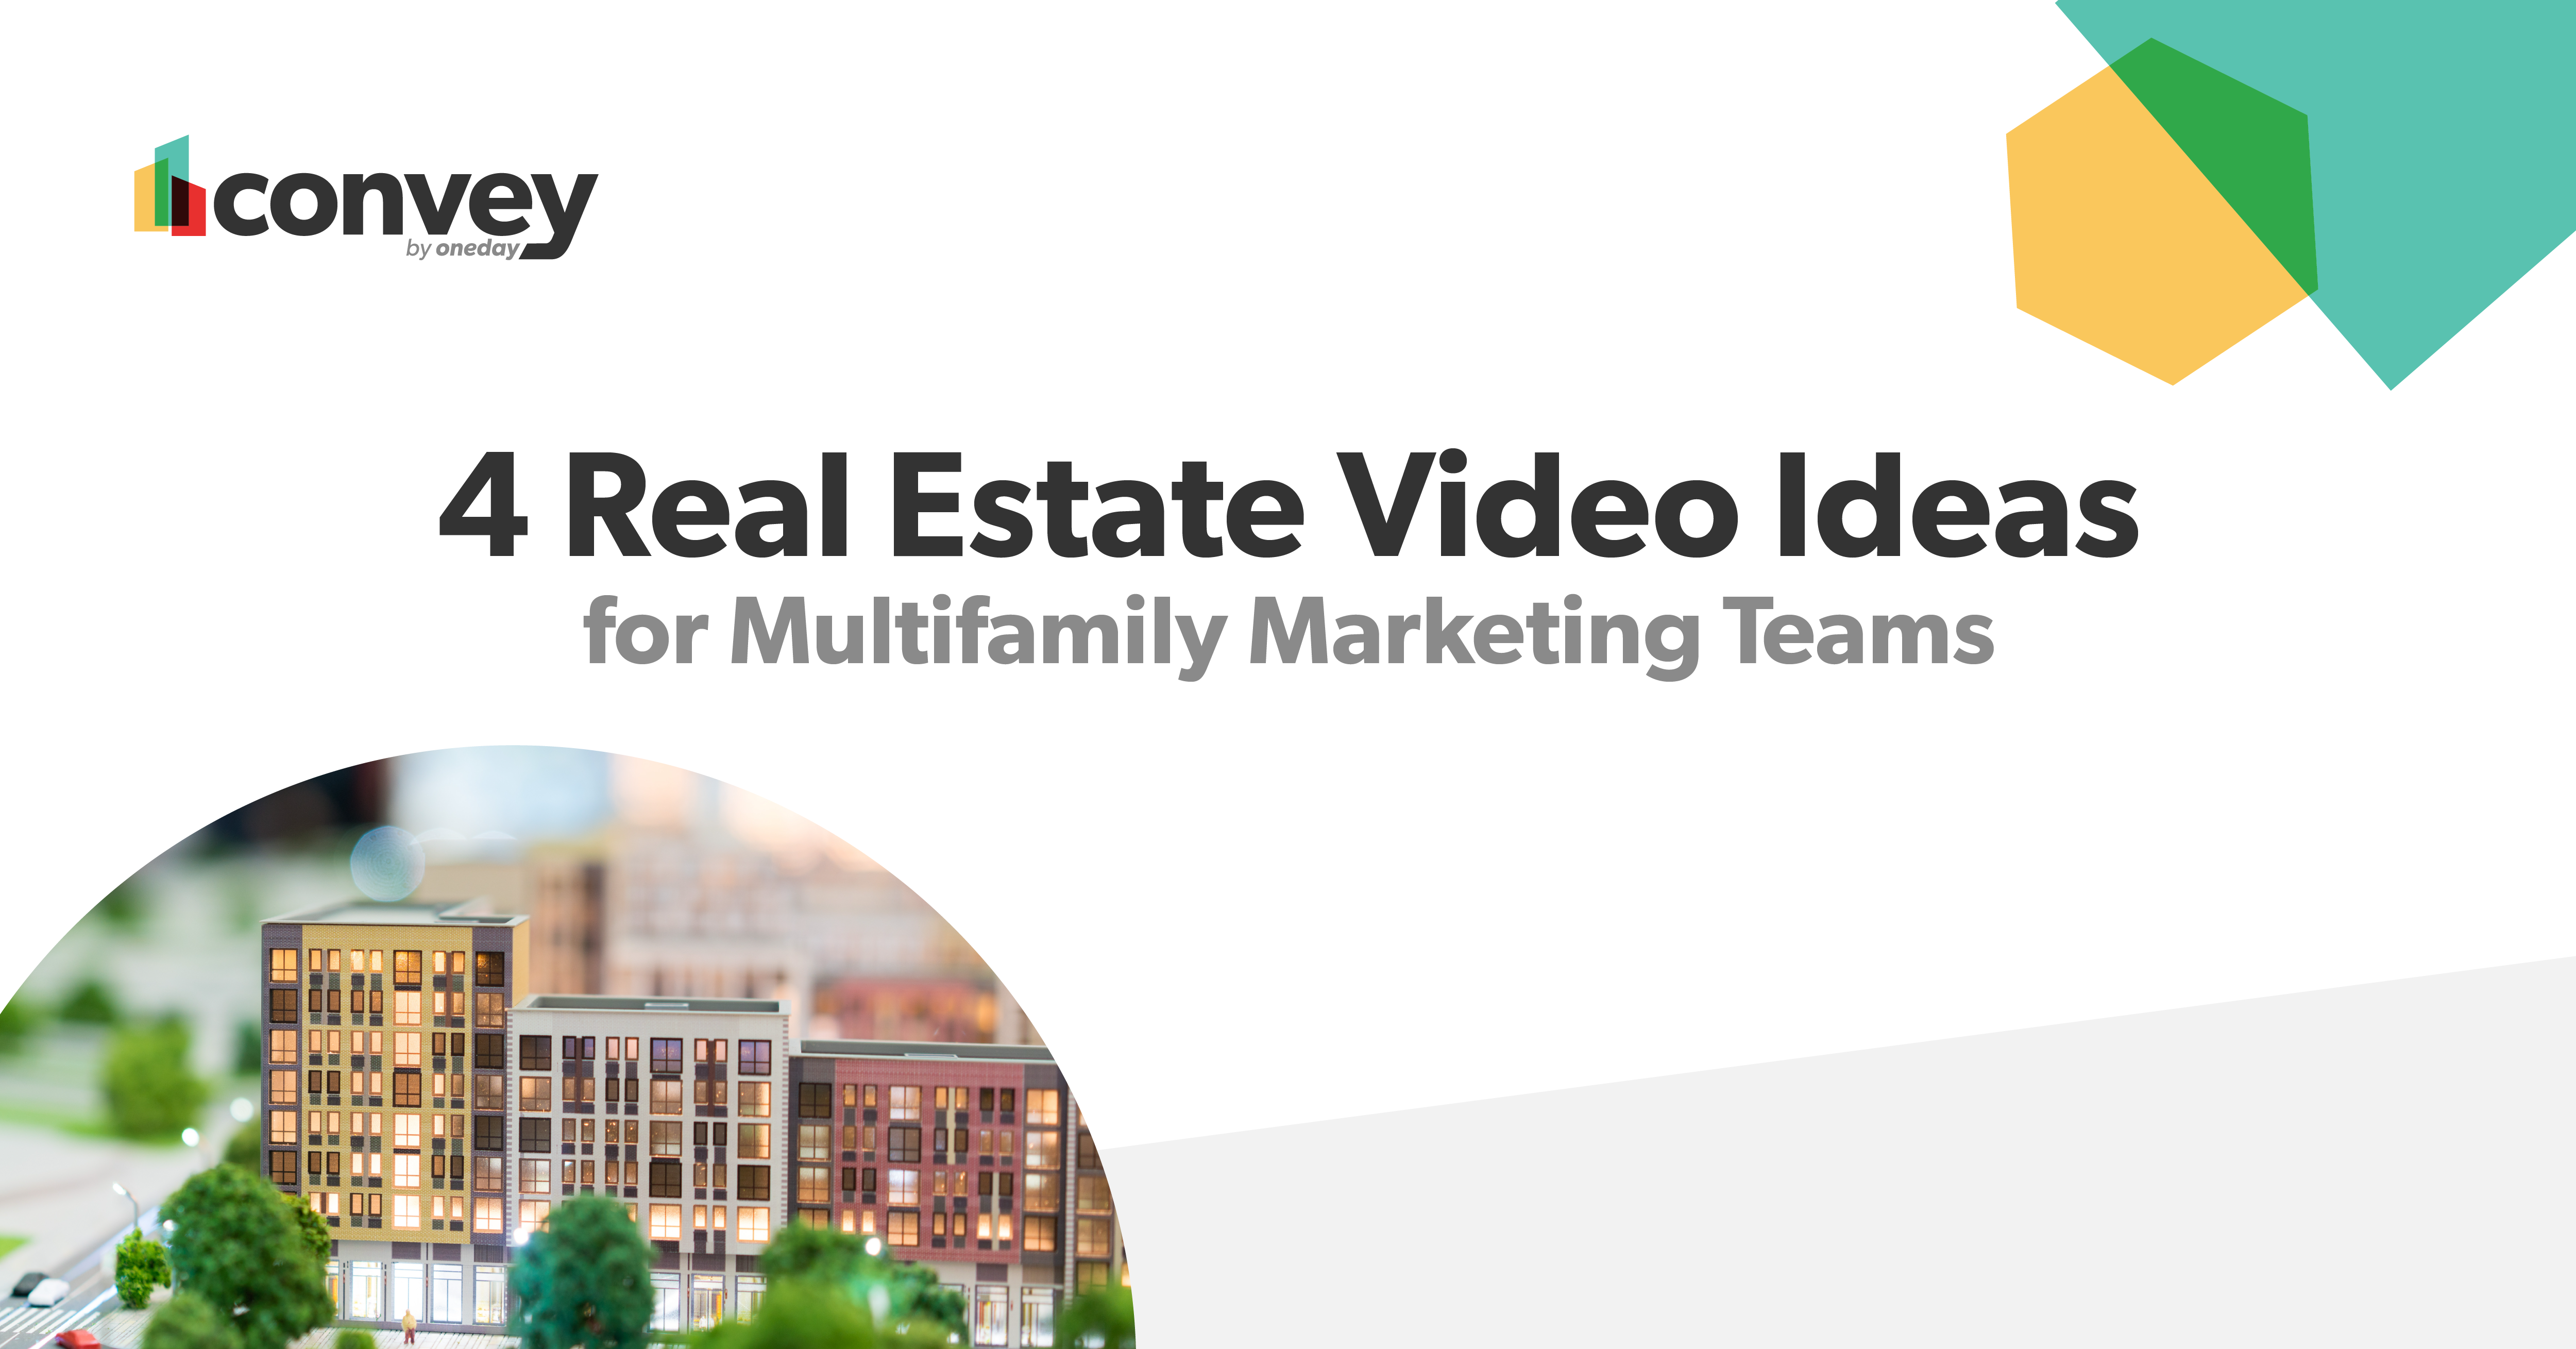 Simple insights and tips on using real estate videos to engage prospects and residents to propel your multifamily sales and marketing forward.